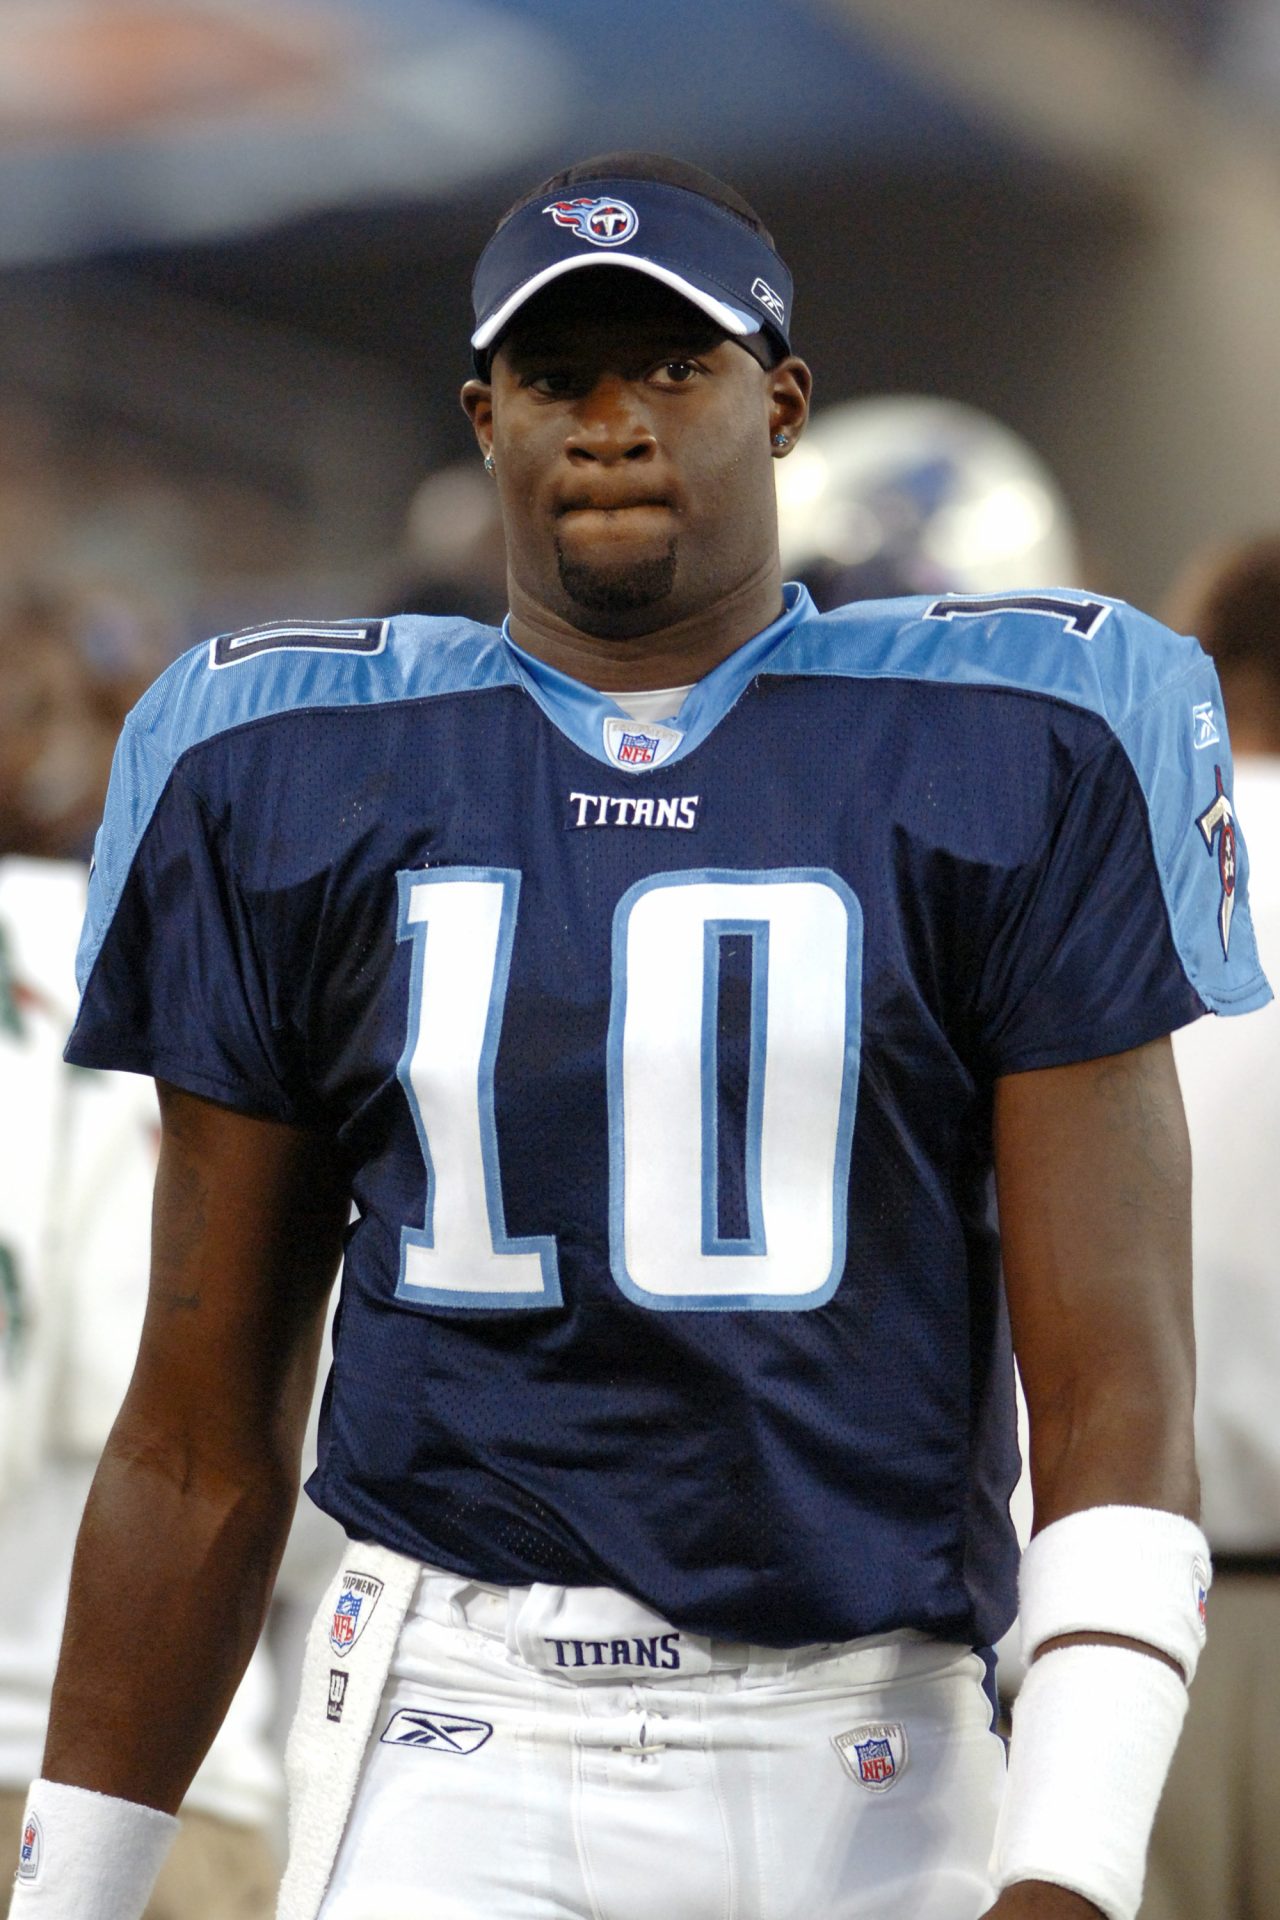 $15k a month at The Cheesecake Factory!? How former NFL star Vince Young spent his millions